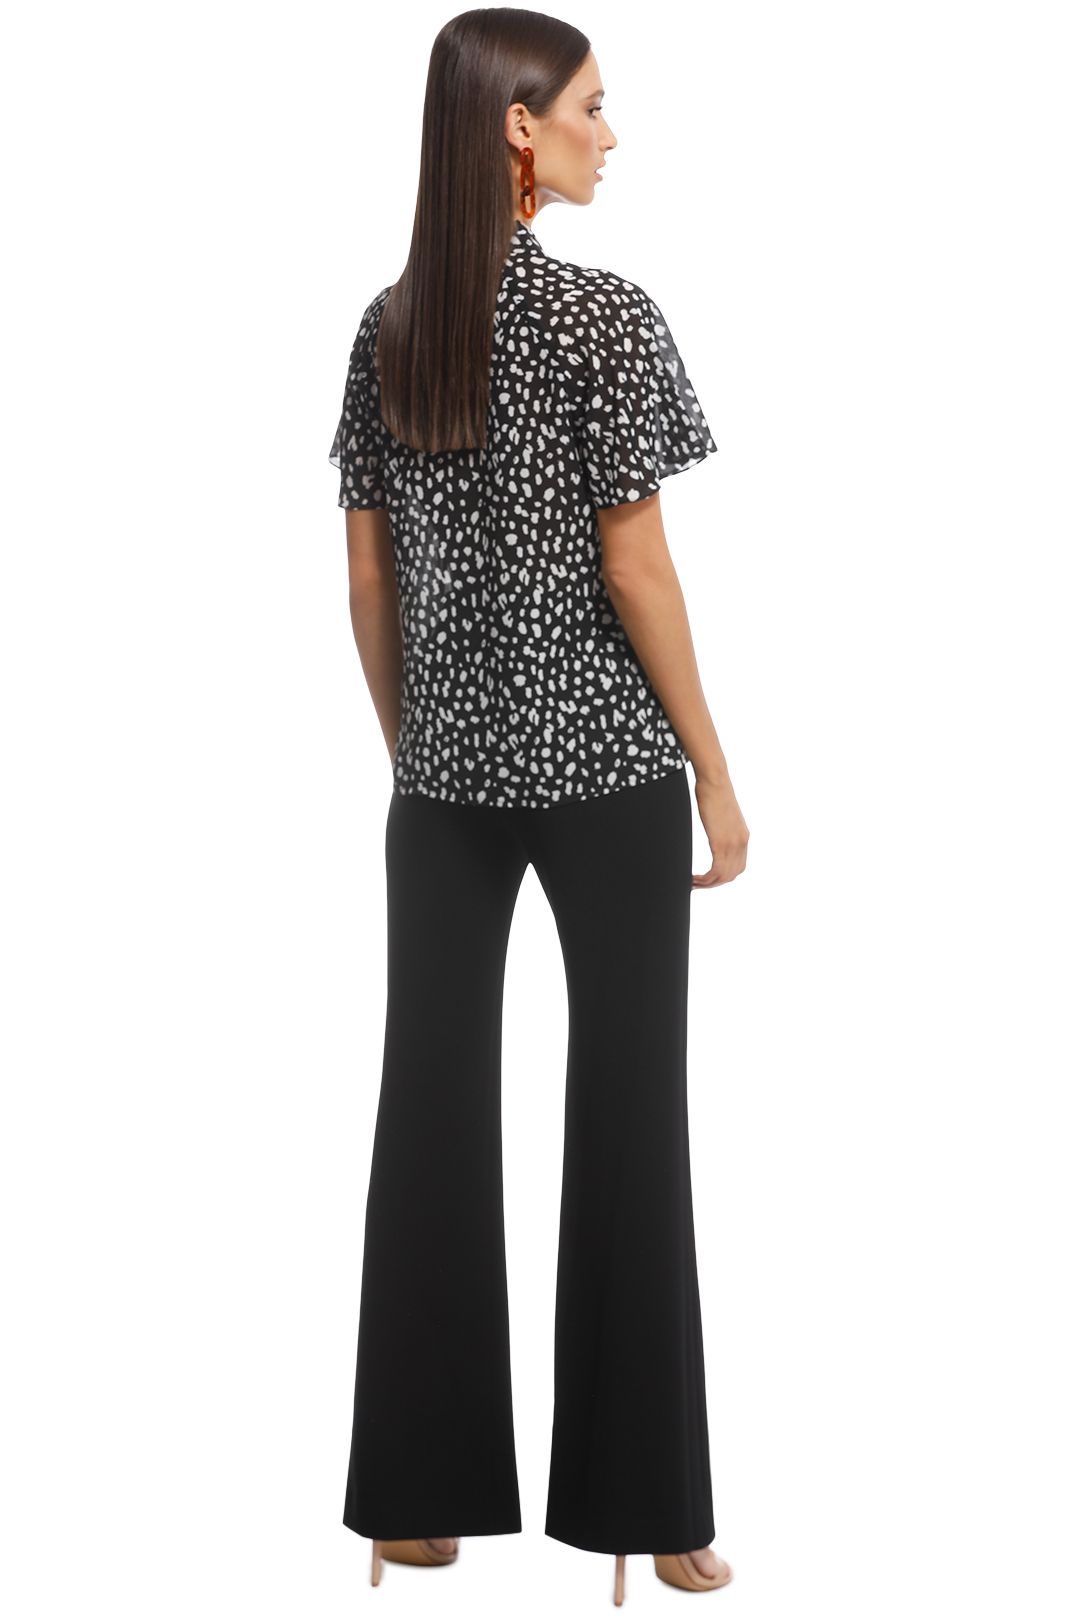 Cue - Animal Georgette Flared Sleeve Shirt - Black and White - Back